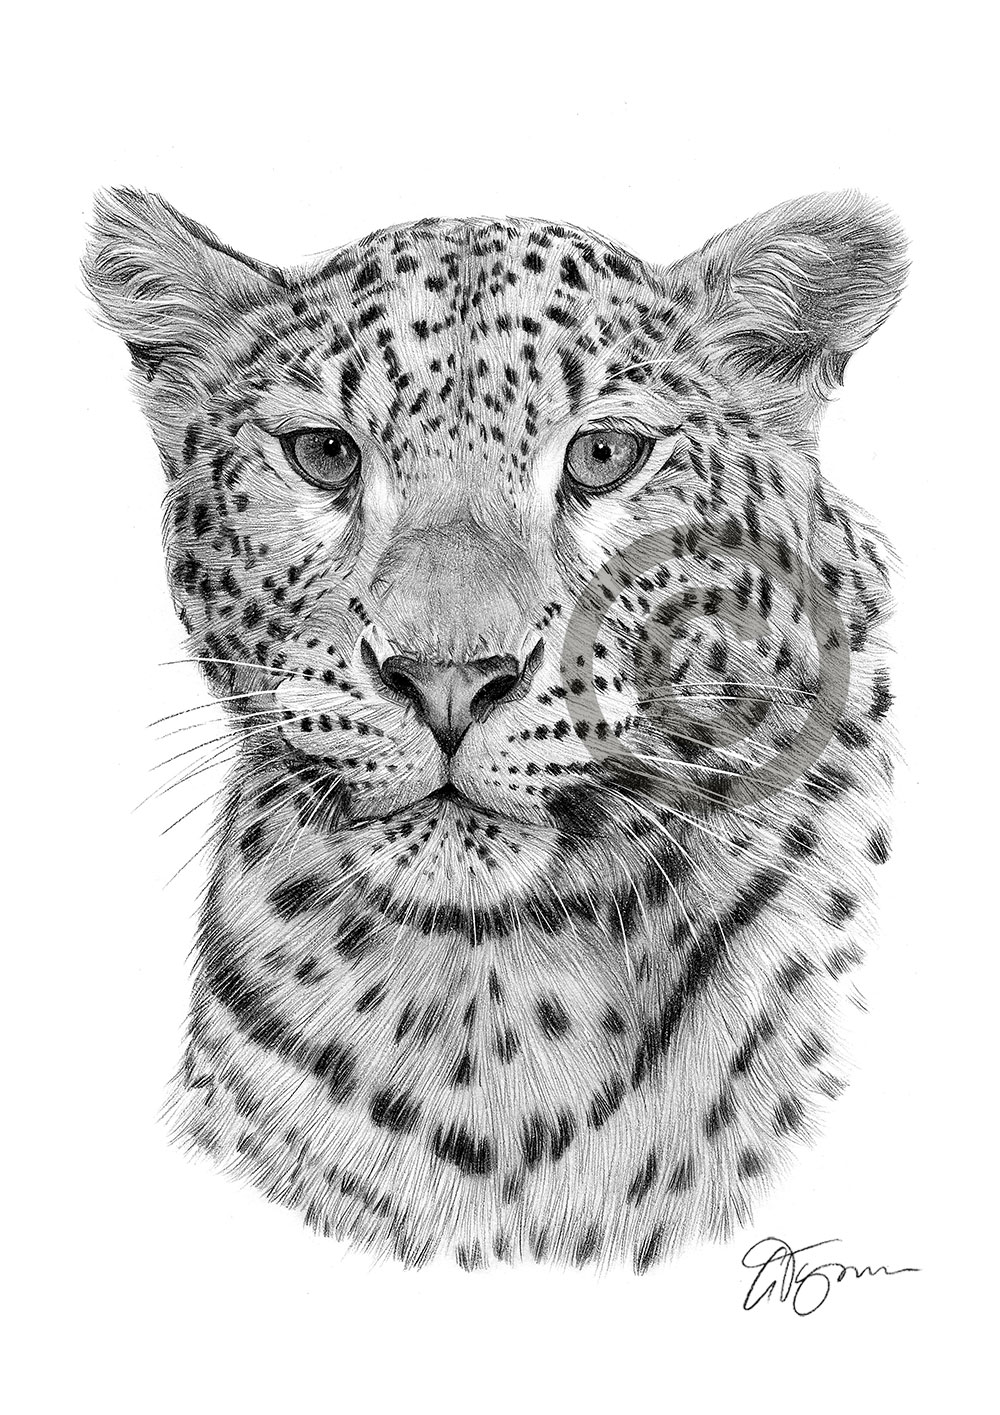 Pencil drawing of a leopard by artist Gary Tymon